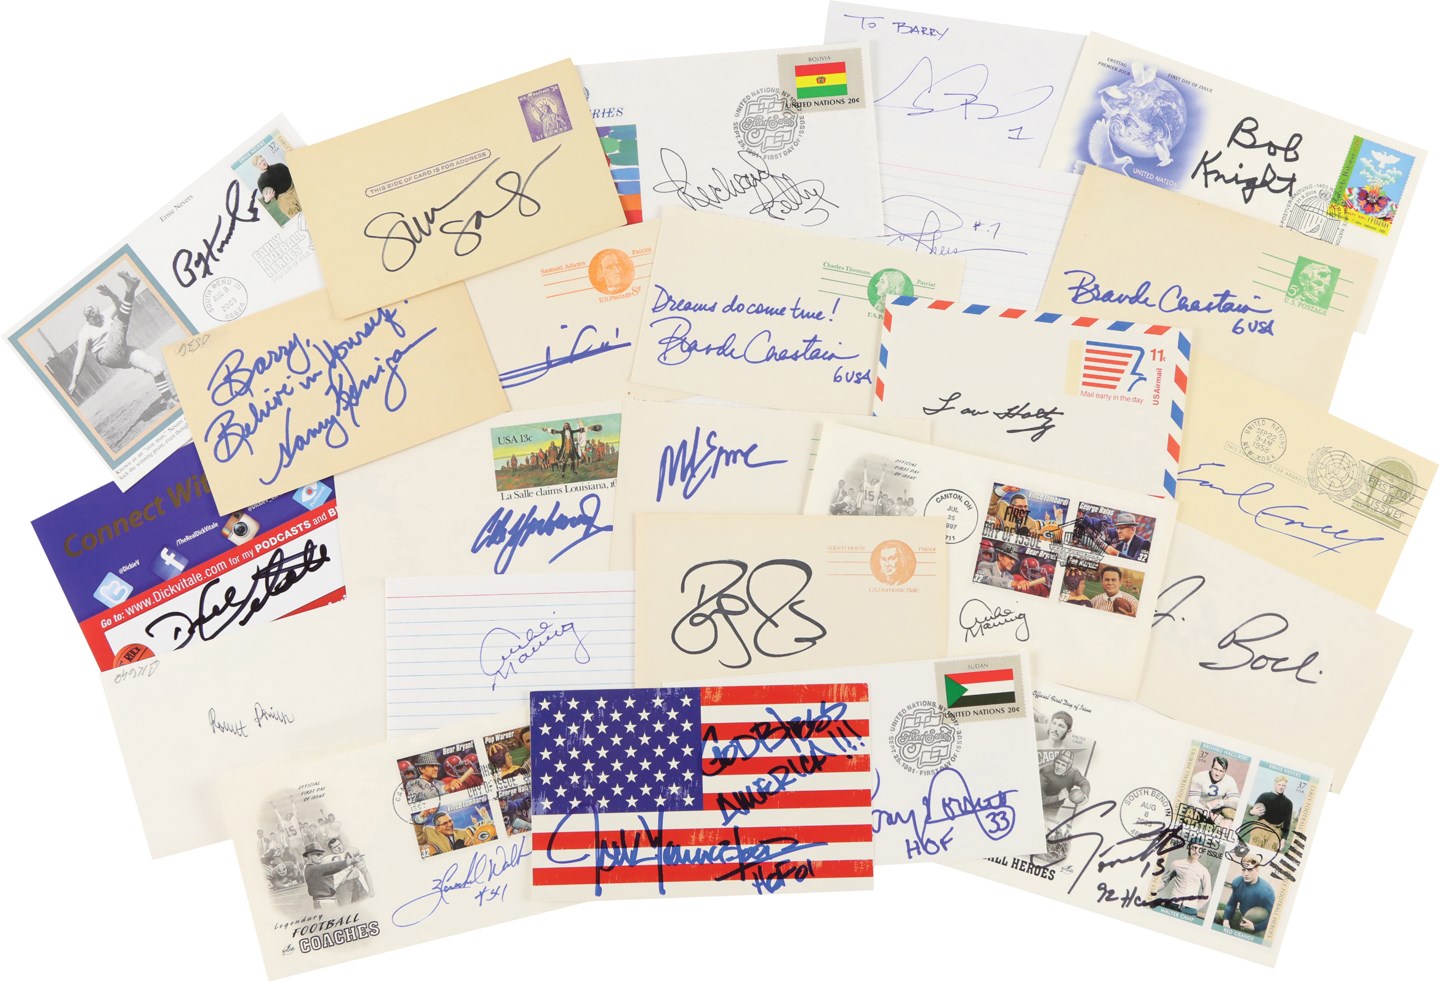 Baseball Autographs - Large Multi-Sport Autograph Collection w/Hall of Famers (475+)